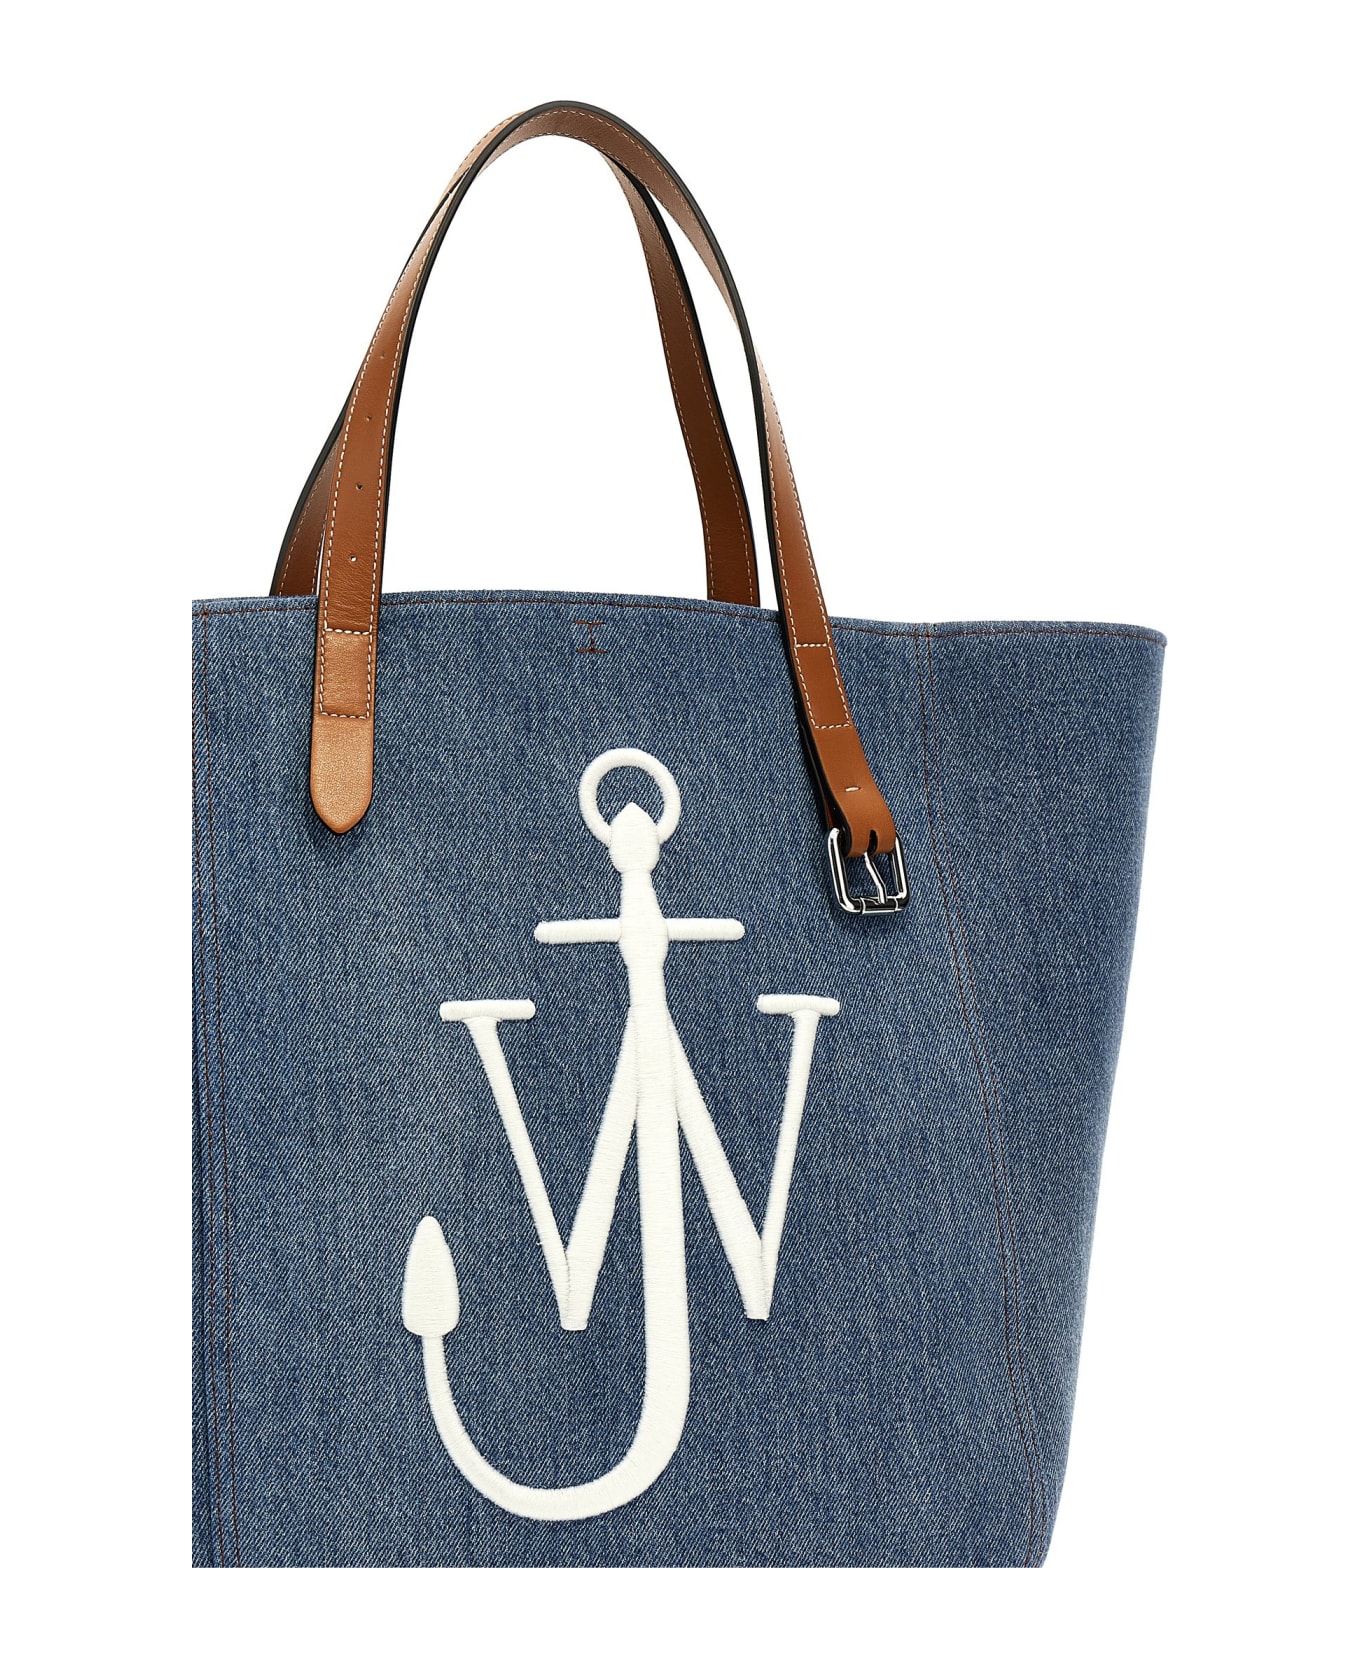 J.W. Anderson 'belt Tote Cabas' Shopping Bag - Blue トートバッグ